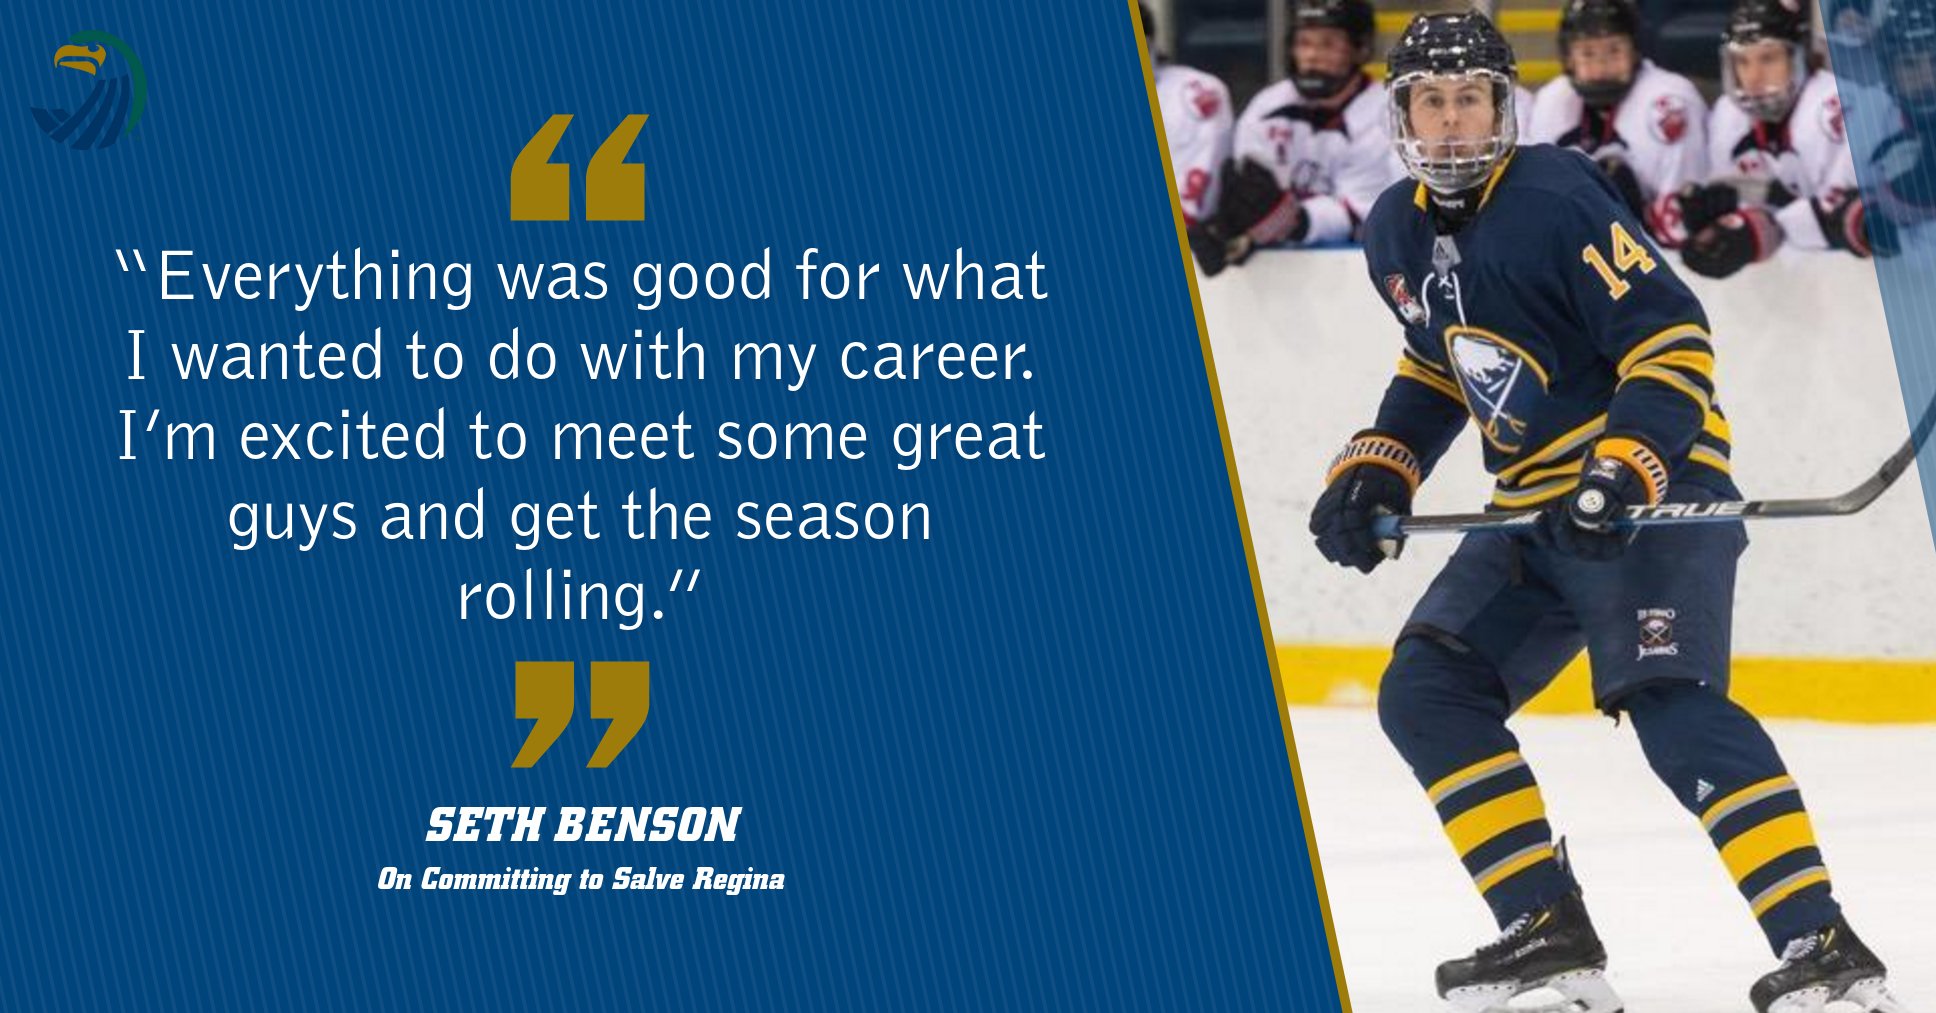 Benson, last played for the Buffalo Jr. Sabres in the Ontario Junior Hockey League (OJHL), has committed to Salve Regina for the 2020-21 season.